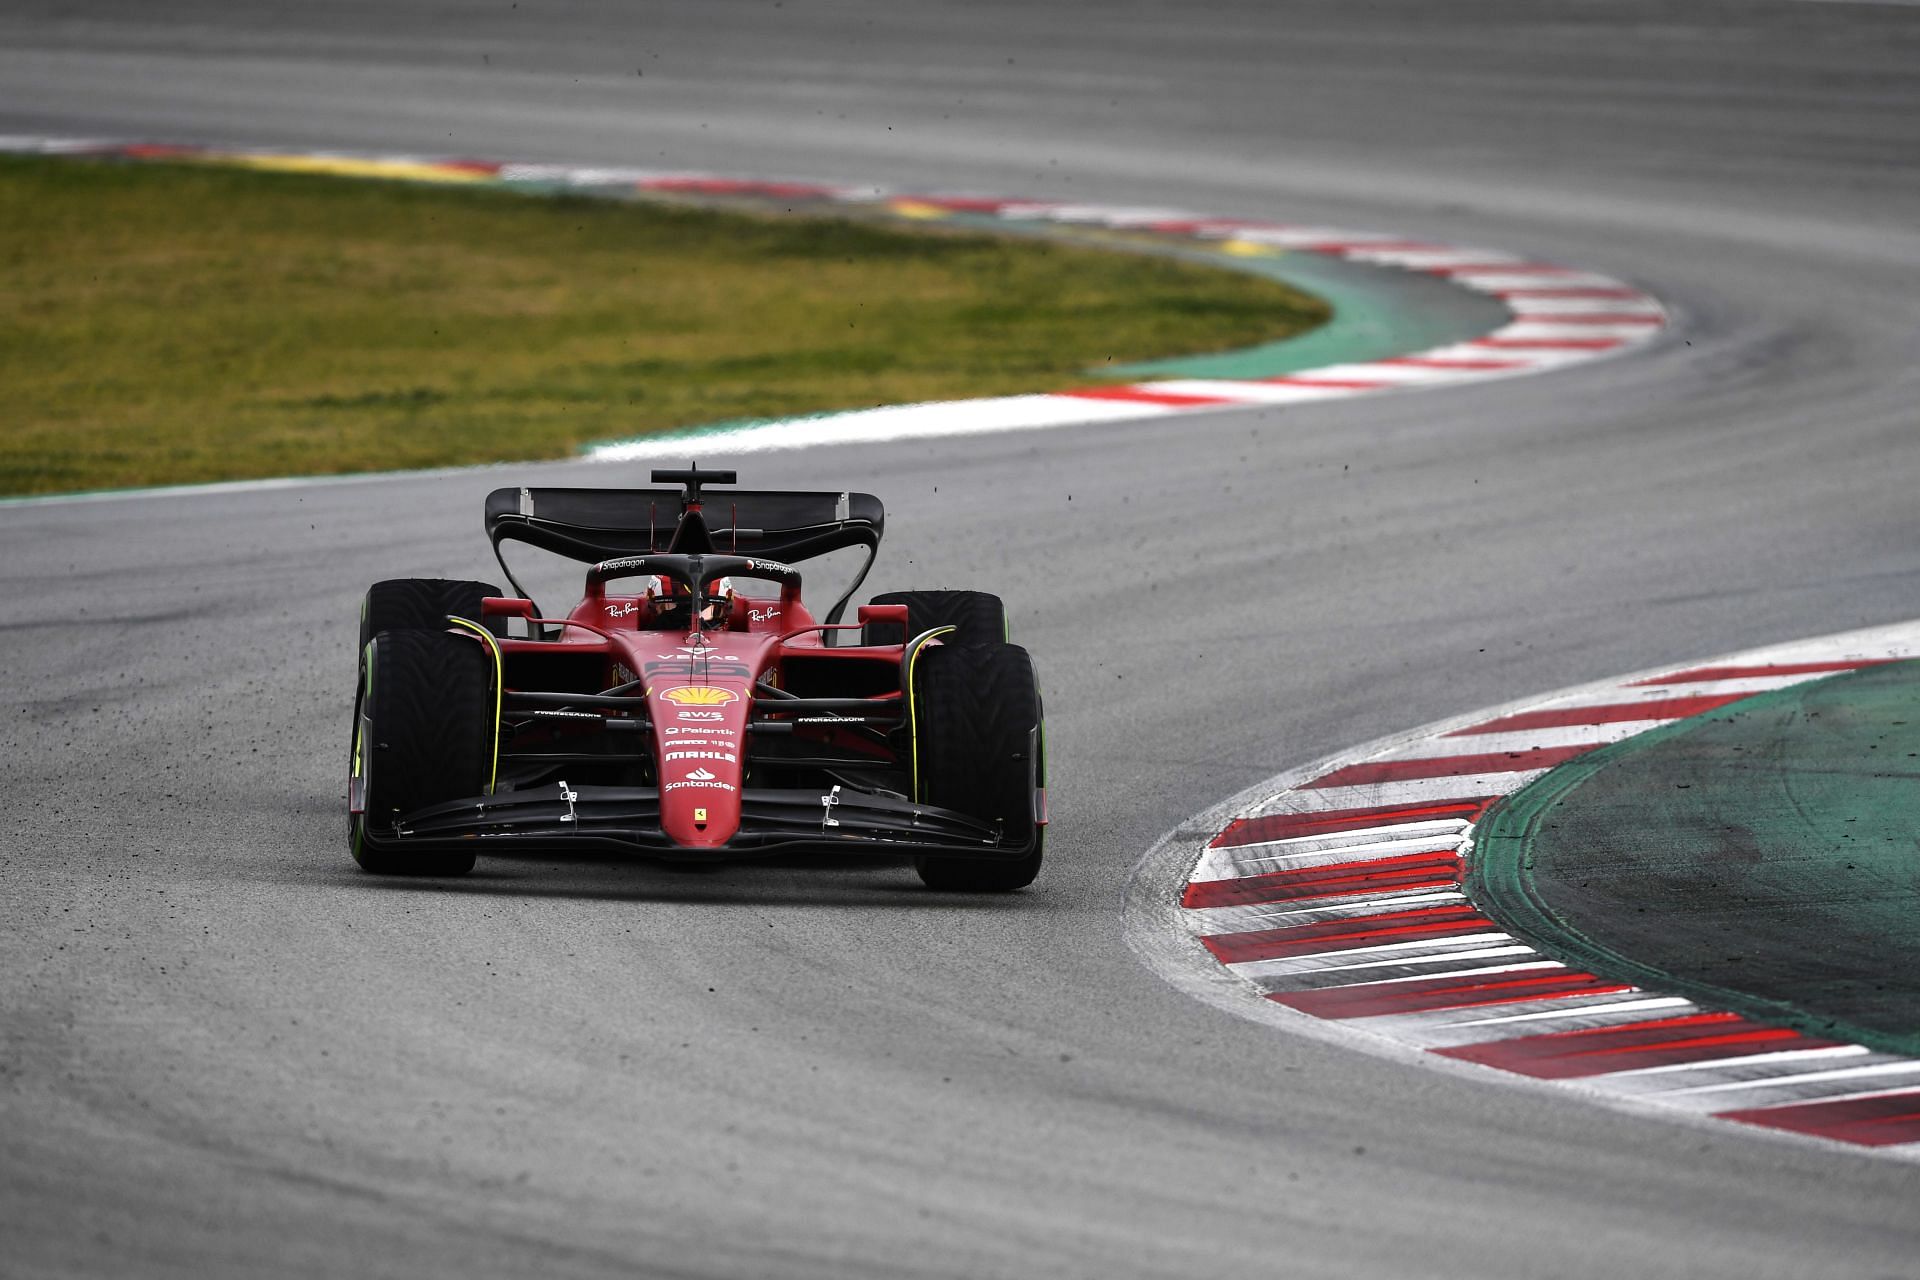 Ferrari is not bringing any major upgrades to the test